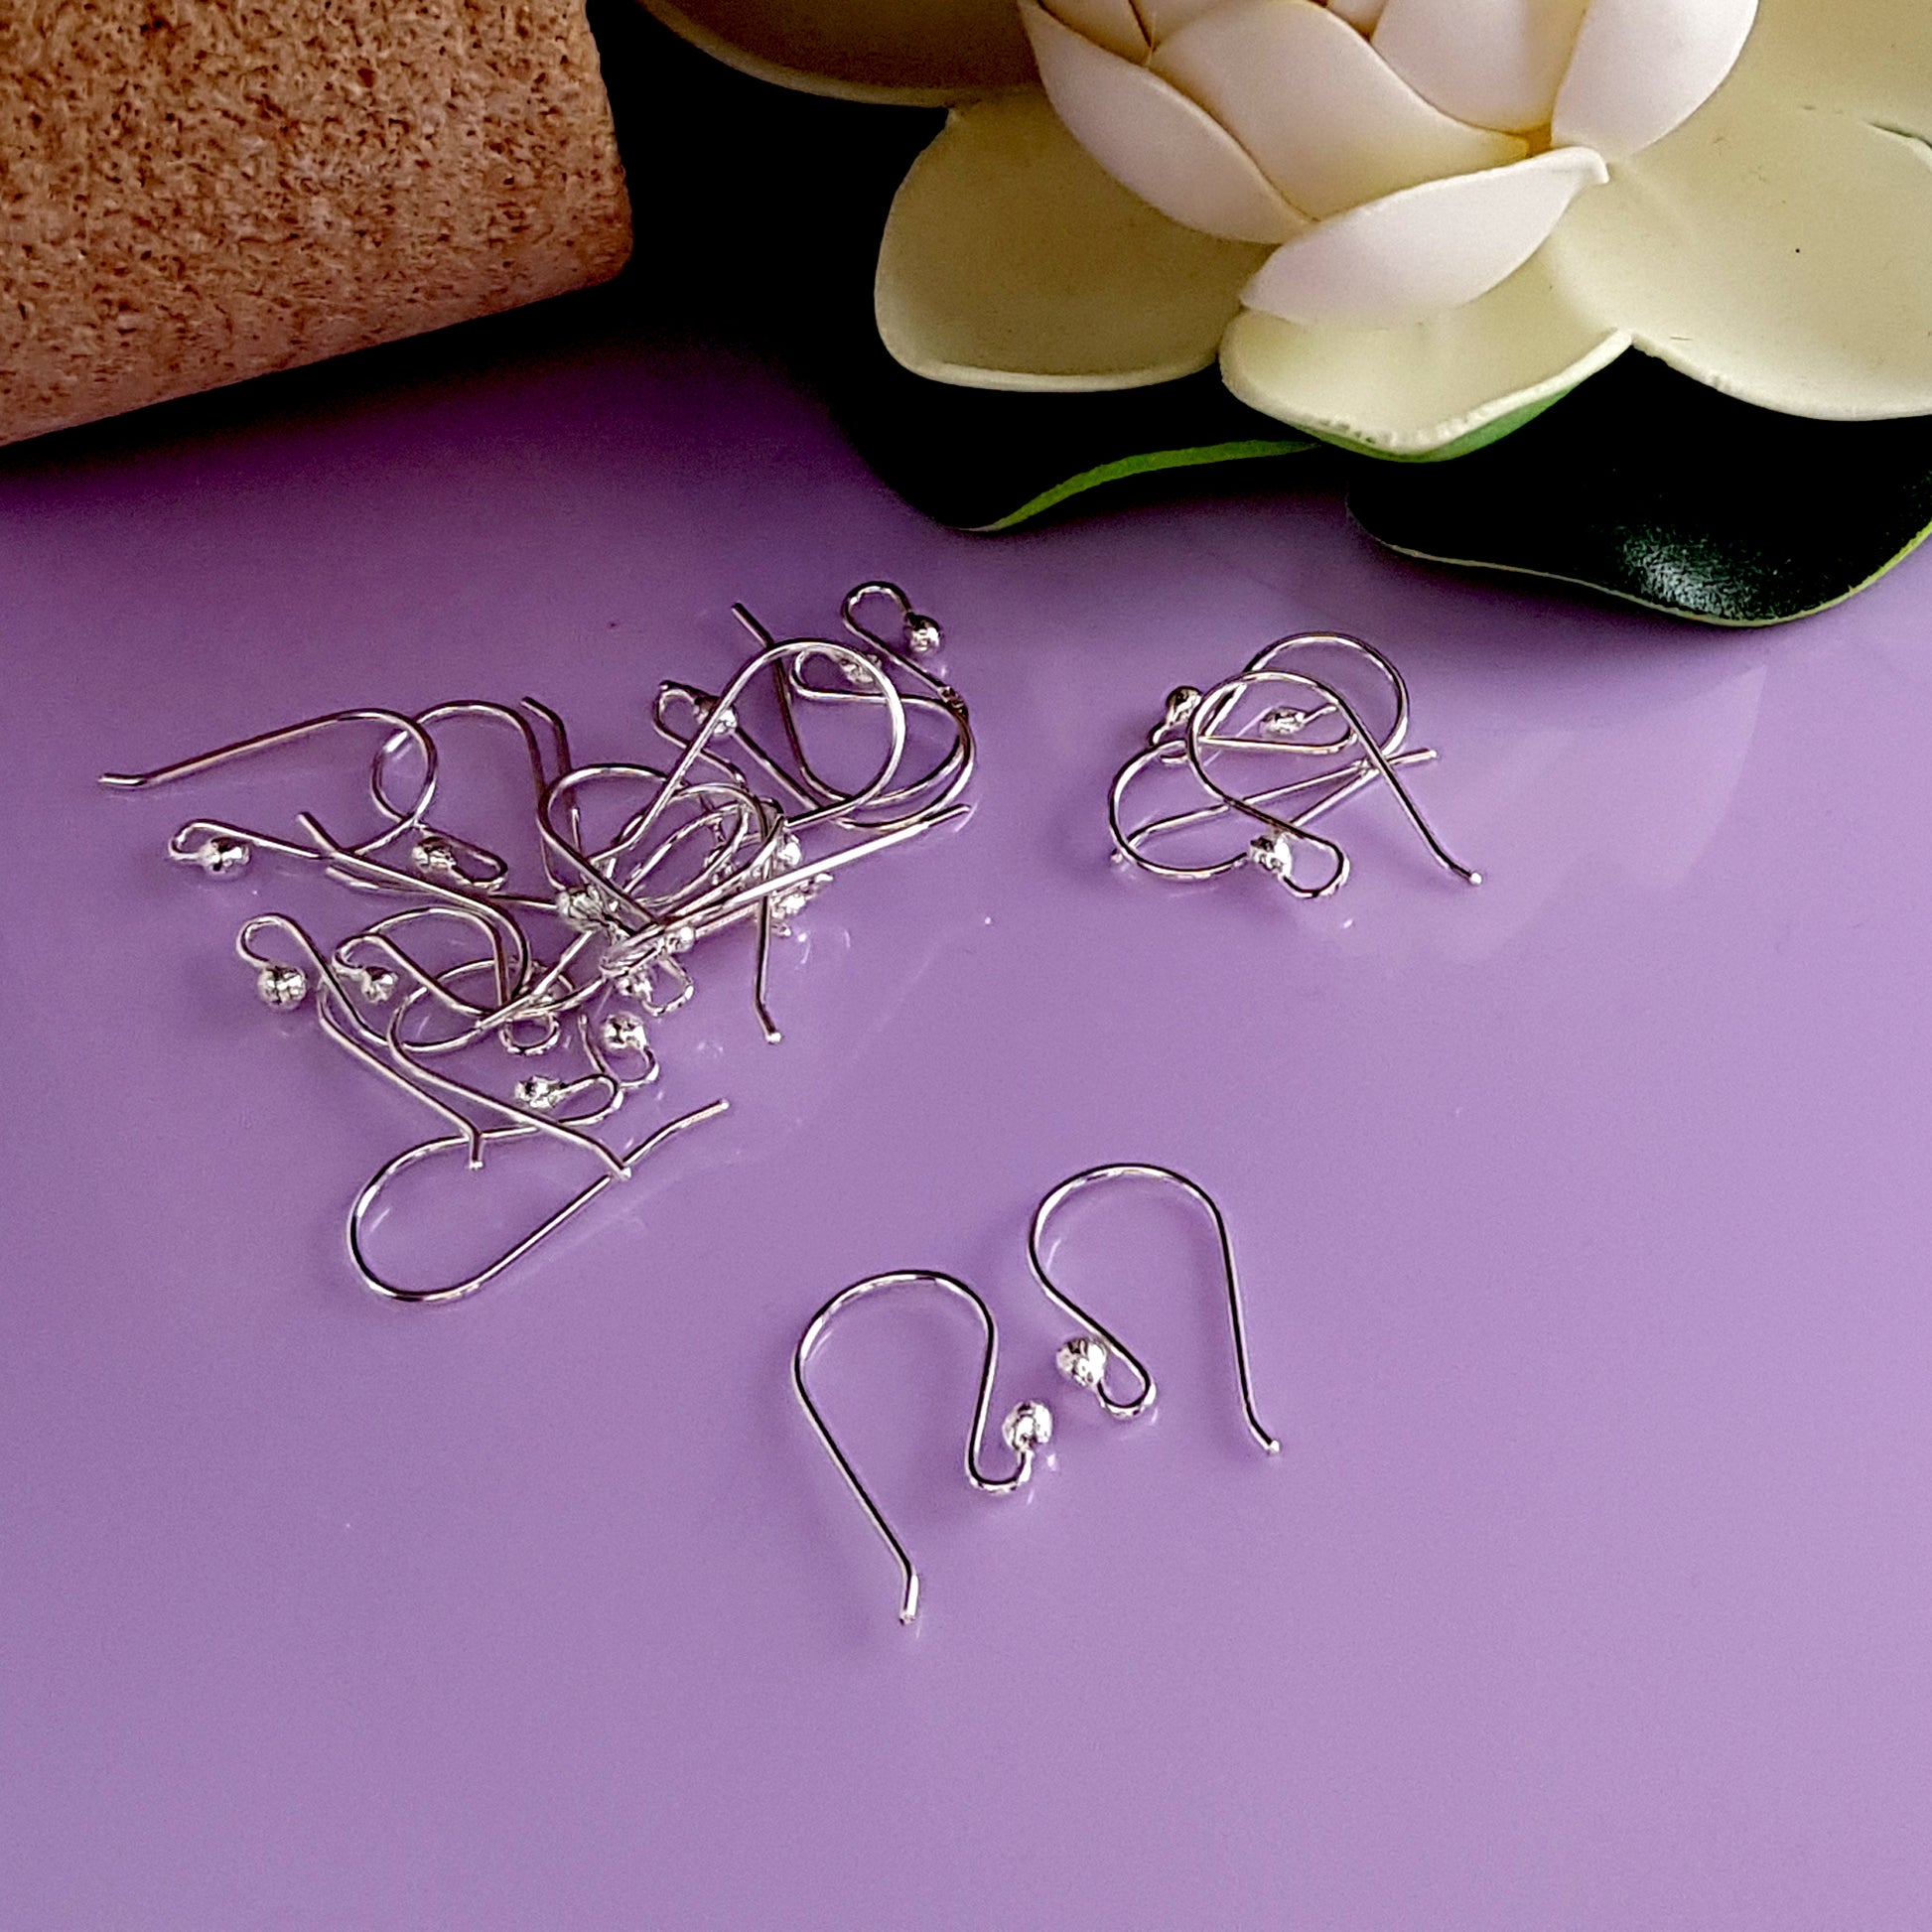 100 Sterling Silver Fish Hook Earring Wires